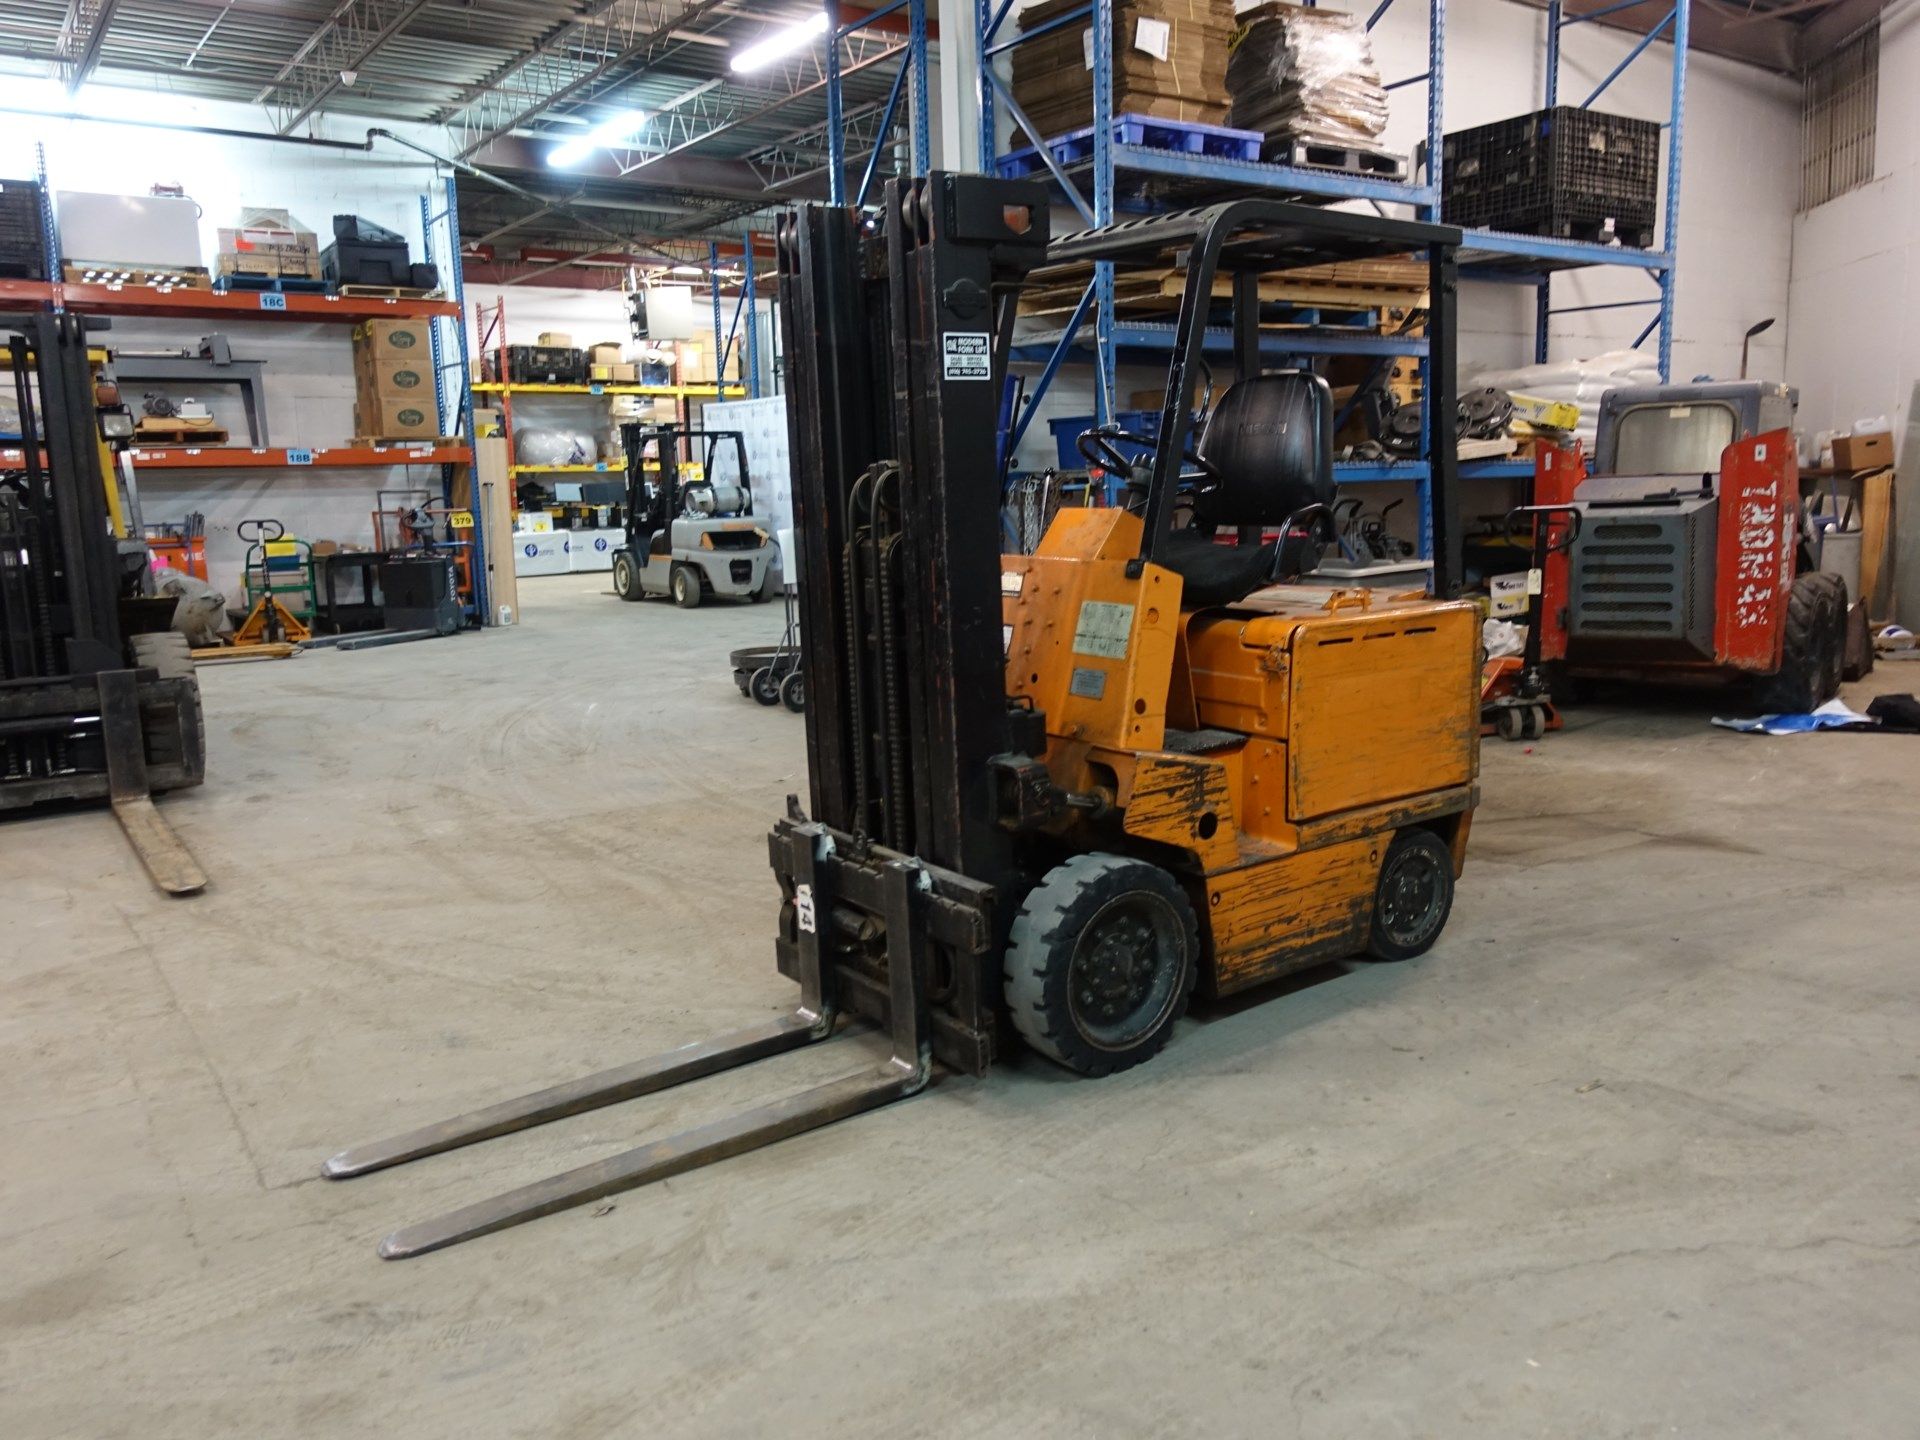 NISSAN, CYB02L20S, 48V, 4,000 LBS, 3 STAGE, ELECTRIC FORKLIFT, CHARGER, 6,304 HOURS (LOCATED AT 1-80